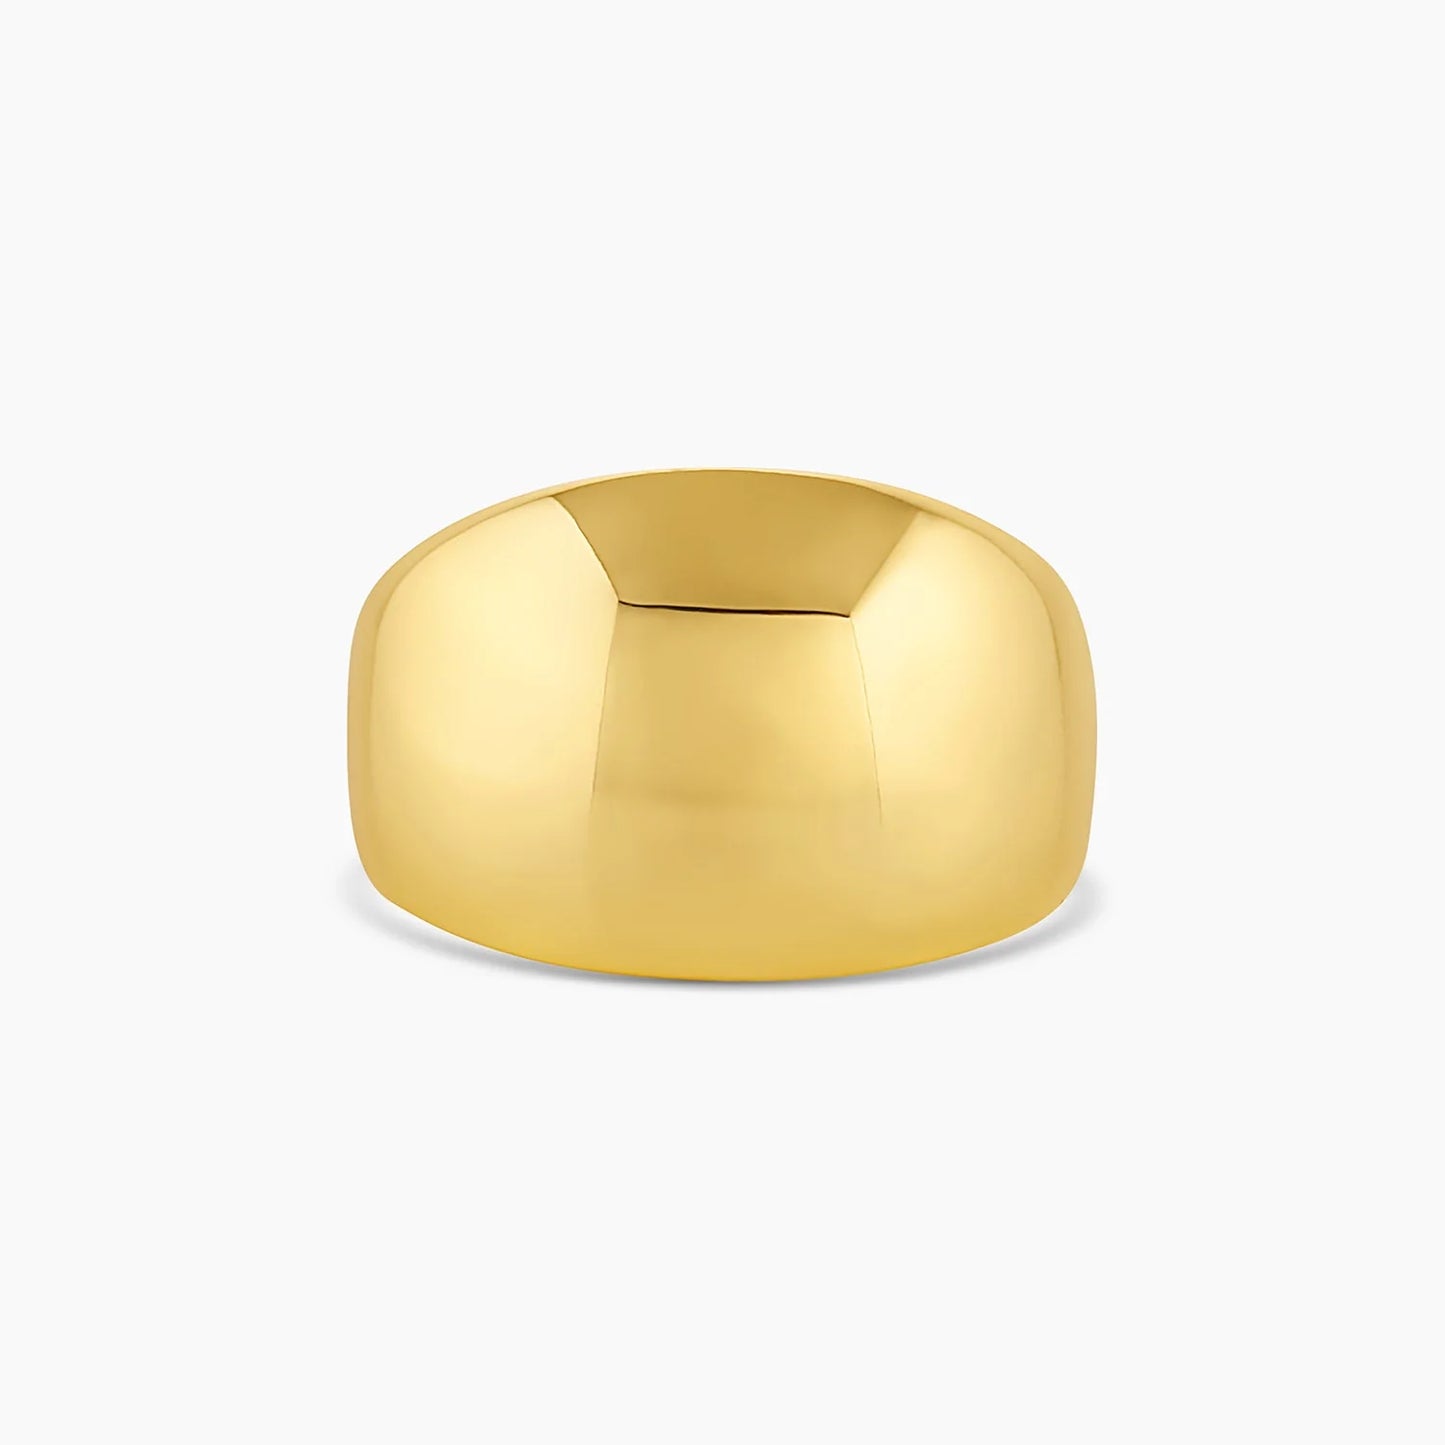 This ring is crafted with 18k gold plated brass and polished for a statement look. Crafted by California designer Gorjana, the Lou Helium Ring transitions flawlessly from day to night. Its durable gold plating ensures a long-lasting and luxurious look.